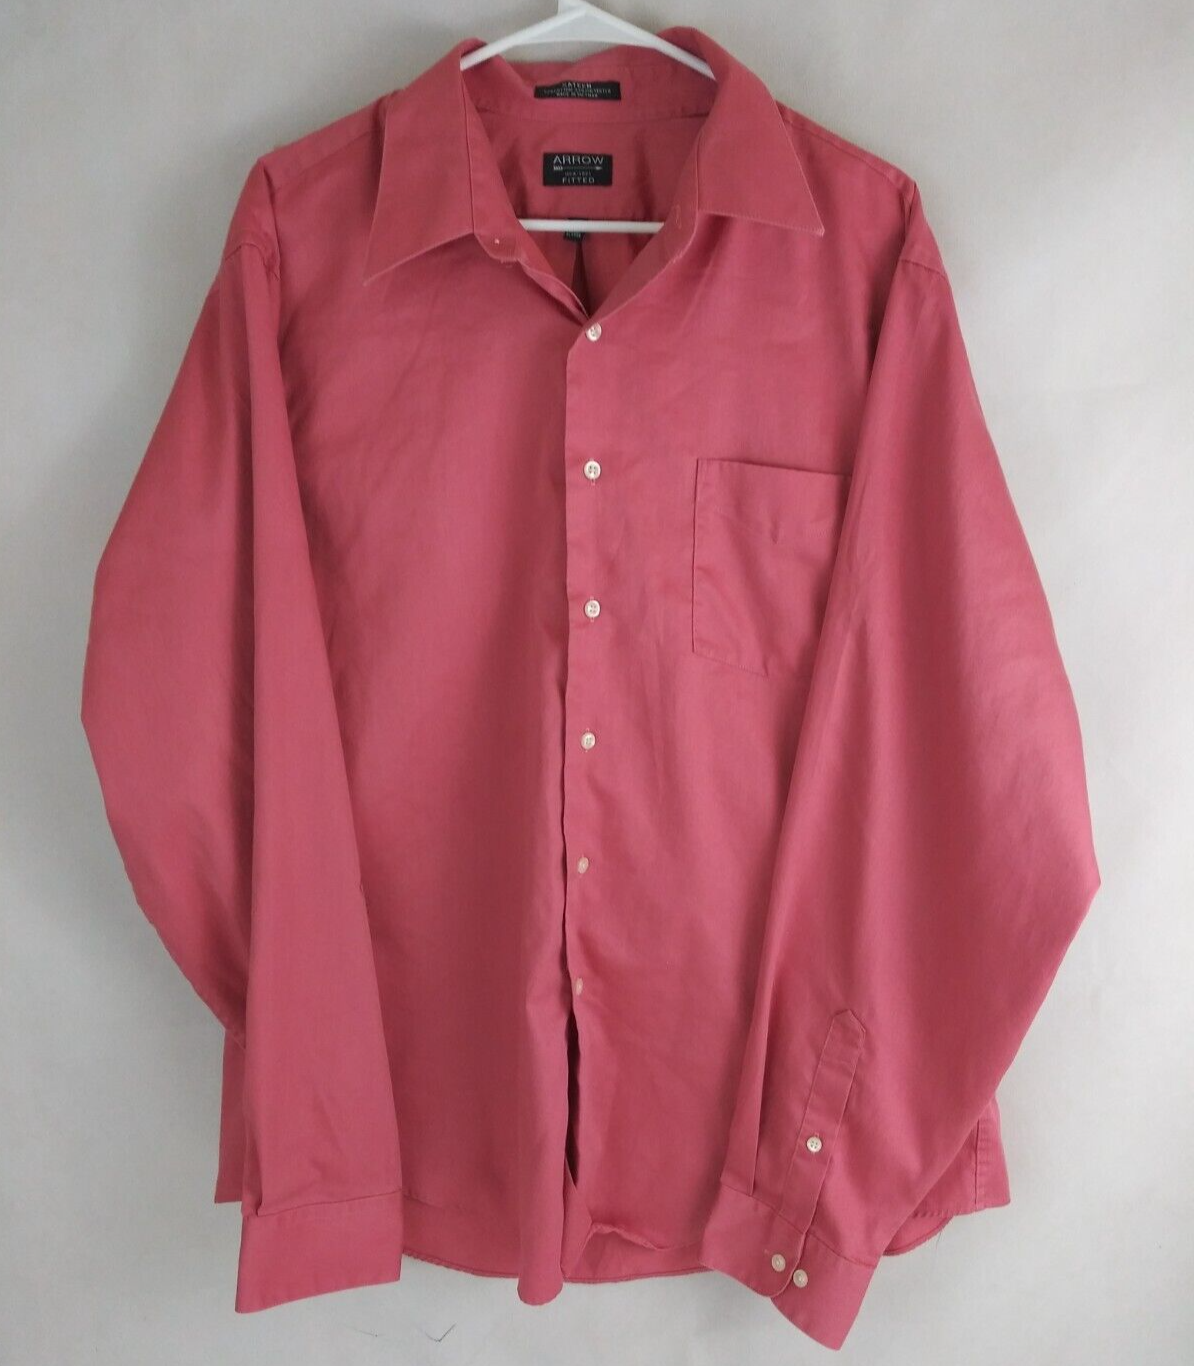 Primary image for Arrow Fitted Wrinkle Free Men's Melon Pink Casual Dress Shirt Size XL